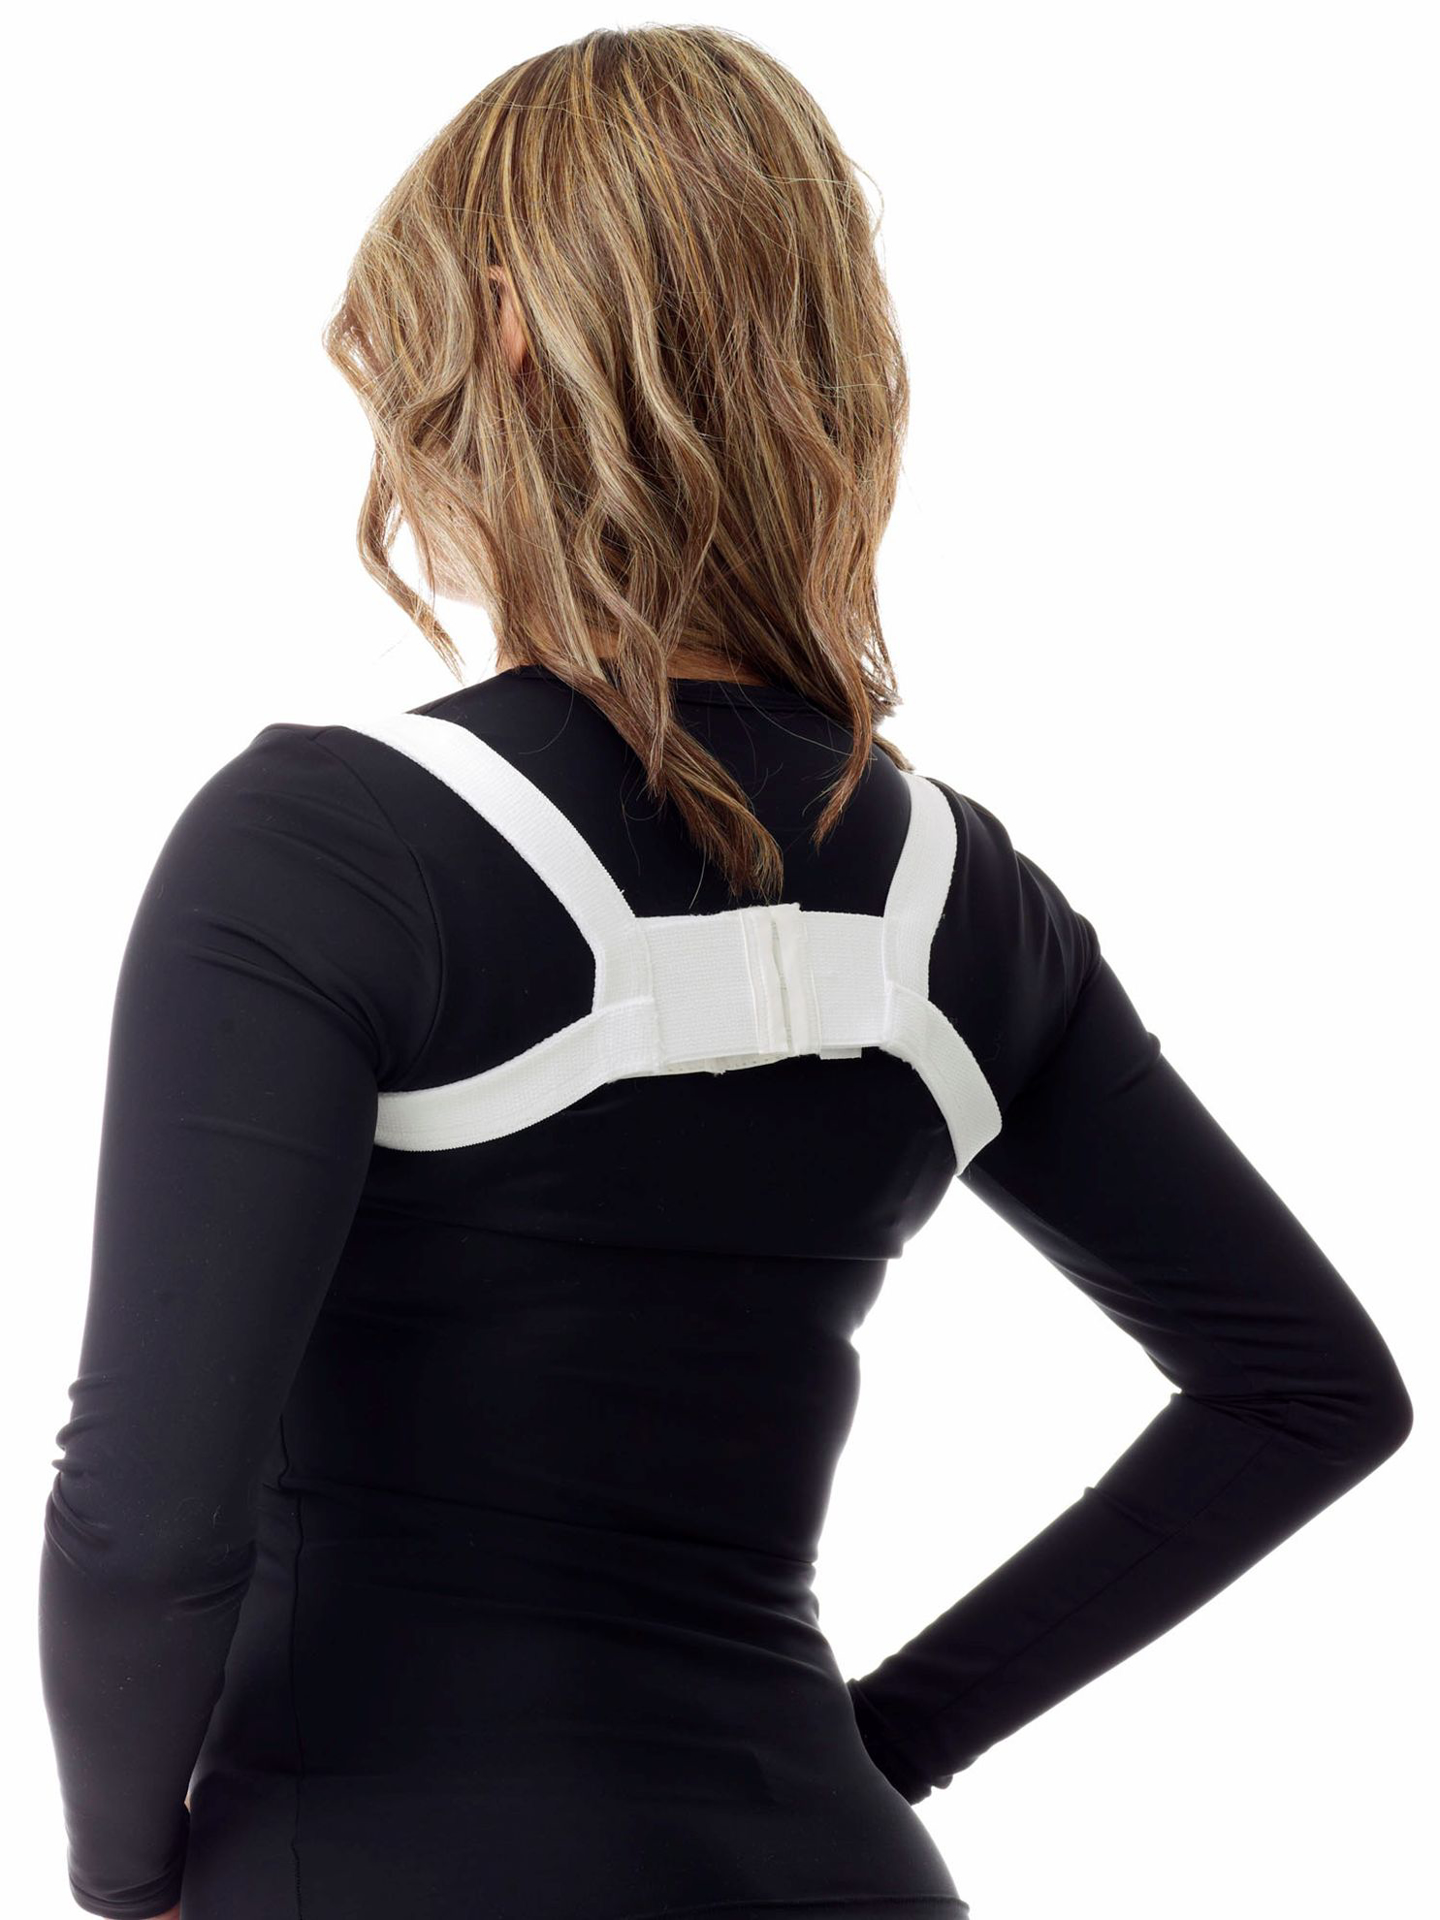 Underworks Post Delivery Abdominal Binder 9-inch with Velcro Closure -  White - S